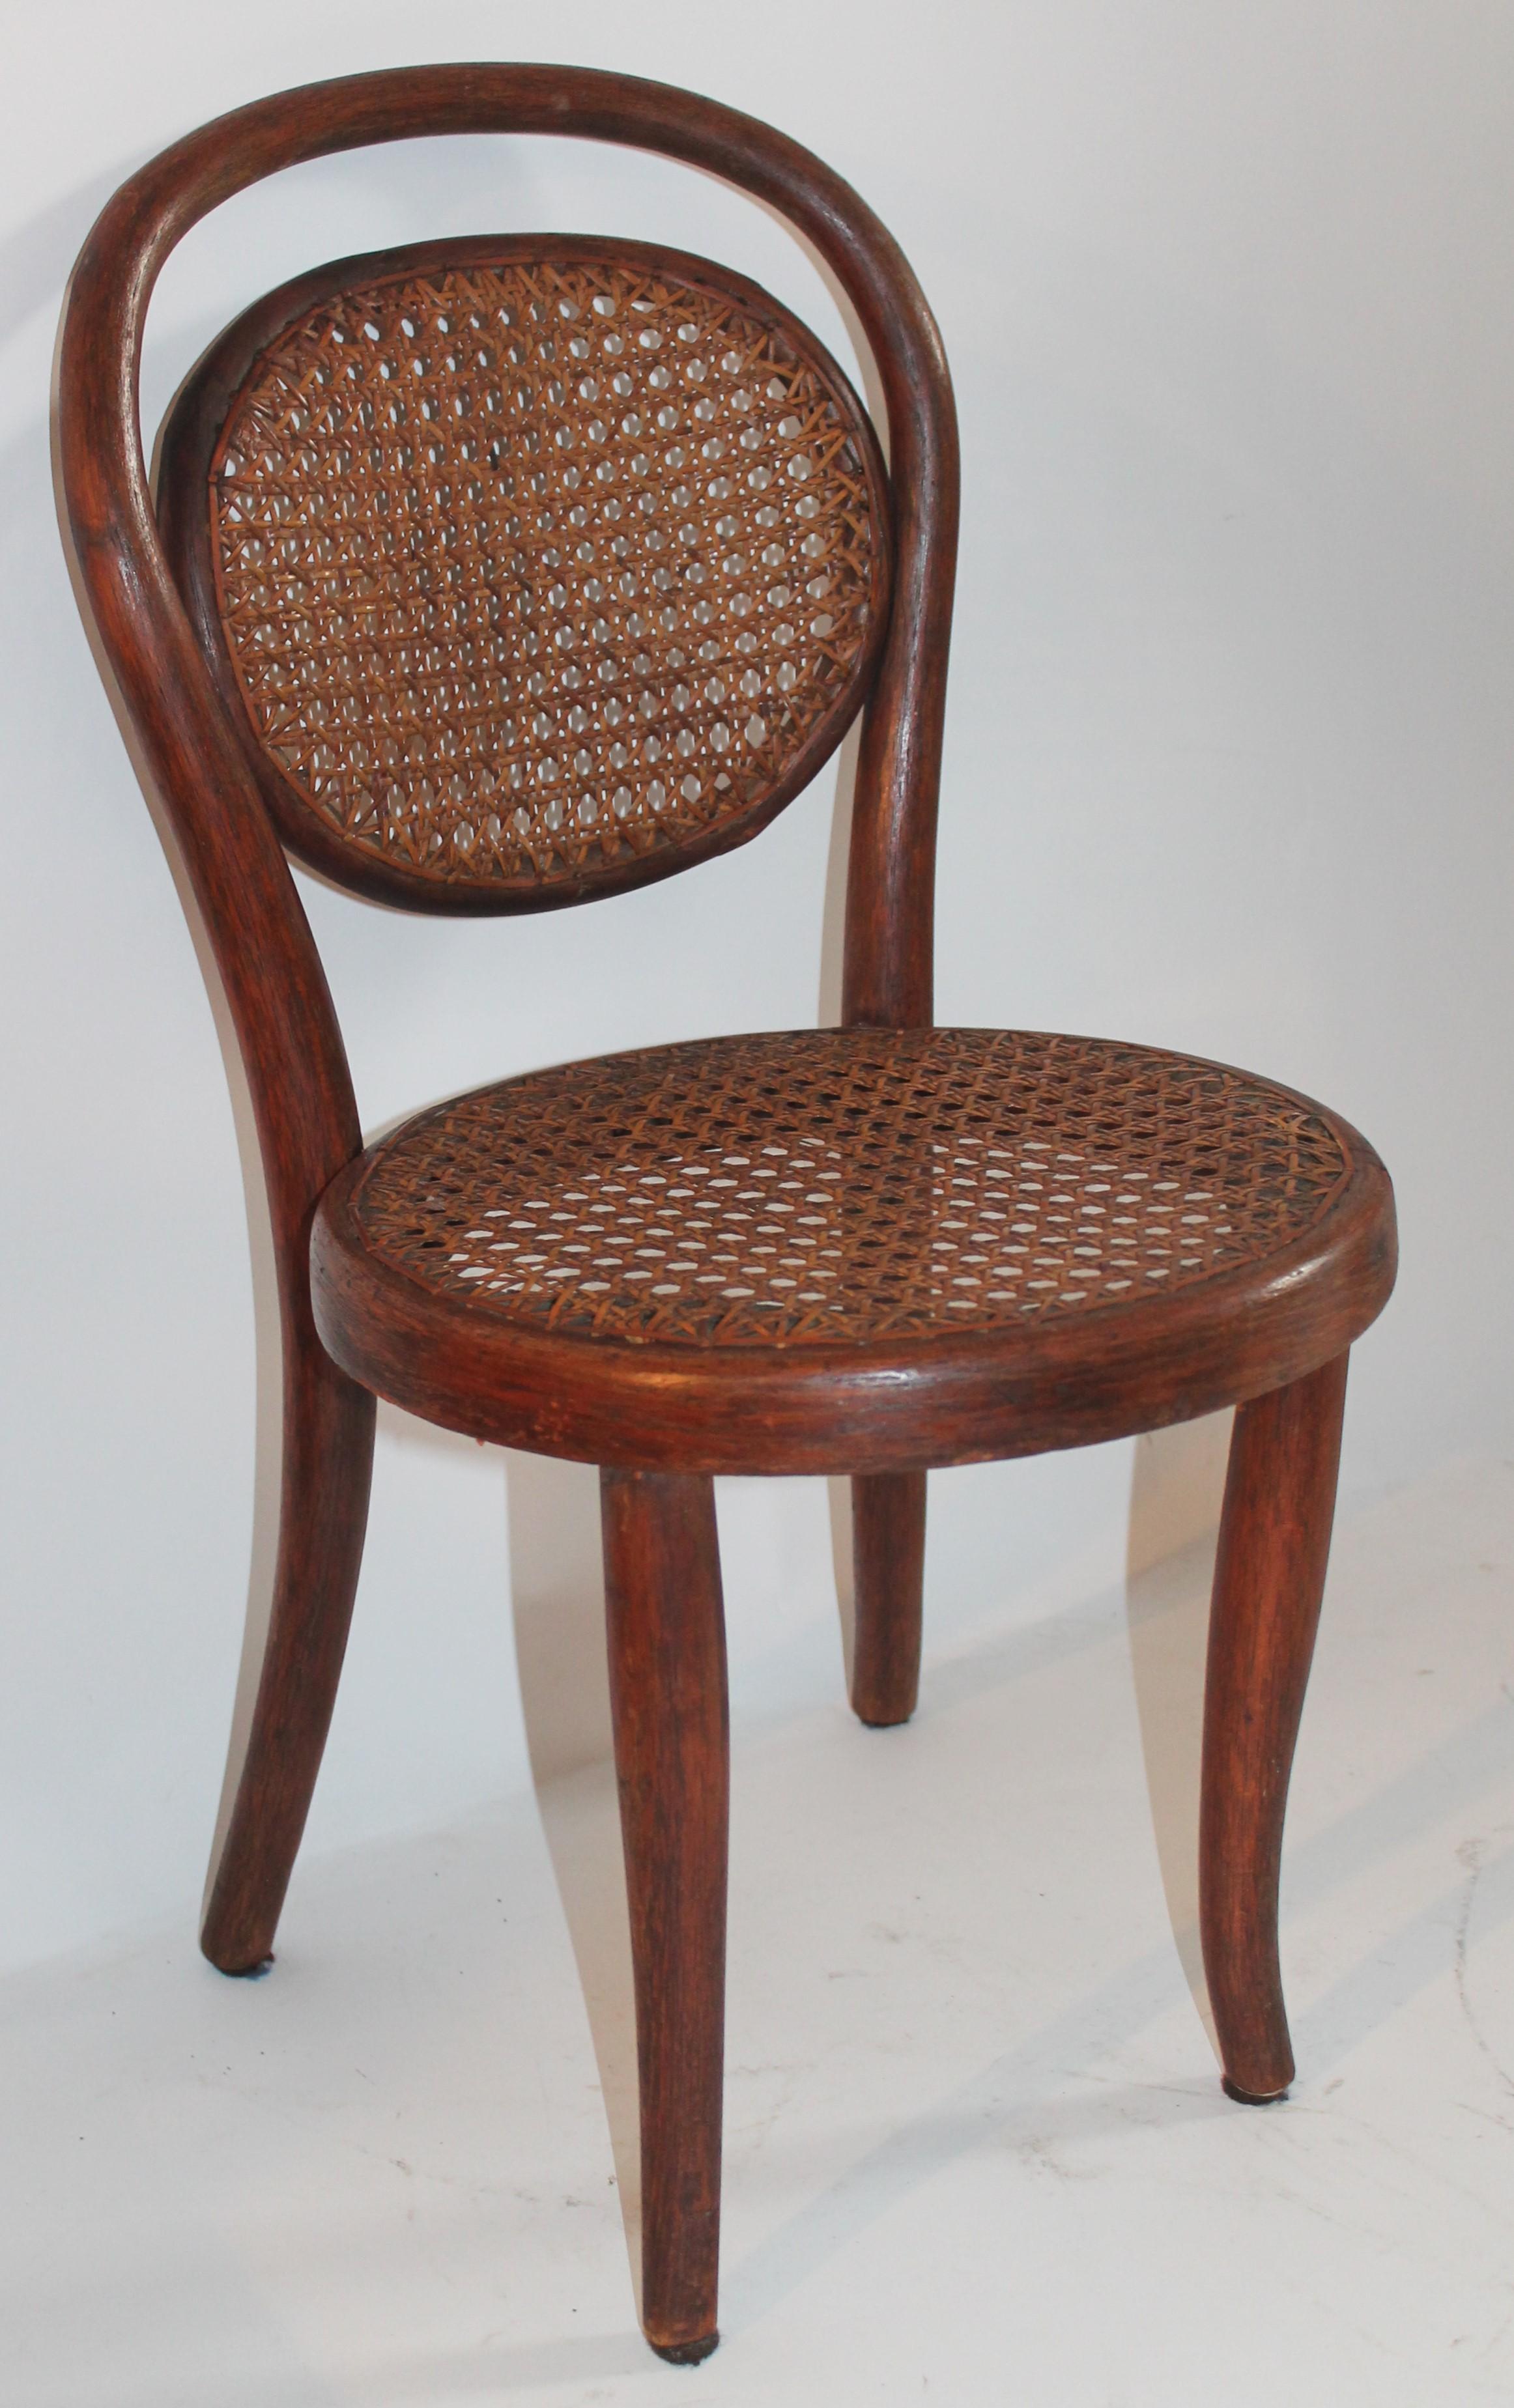 Bentwood Rocker and Chair with Cane Seats, 19th Century For Sale 4